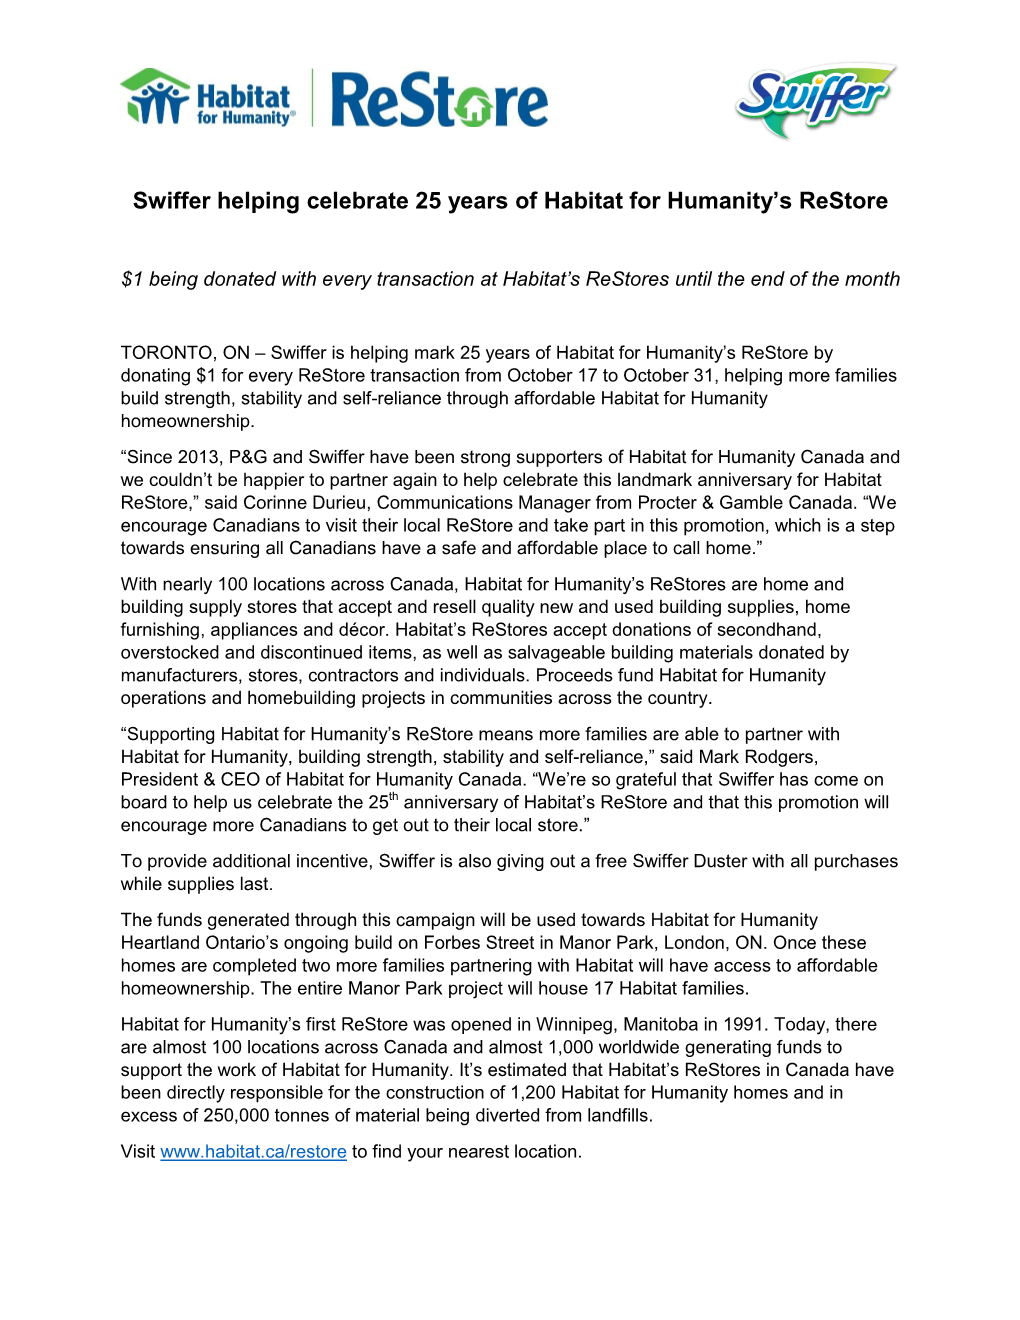 Swiffer Helping Celebrate 25 Years of Habitat for Humanity's Restore